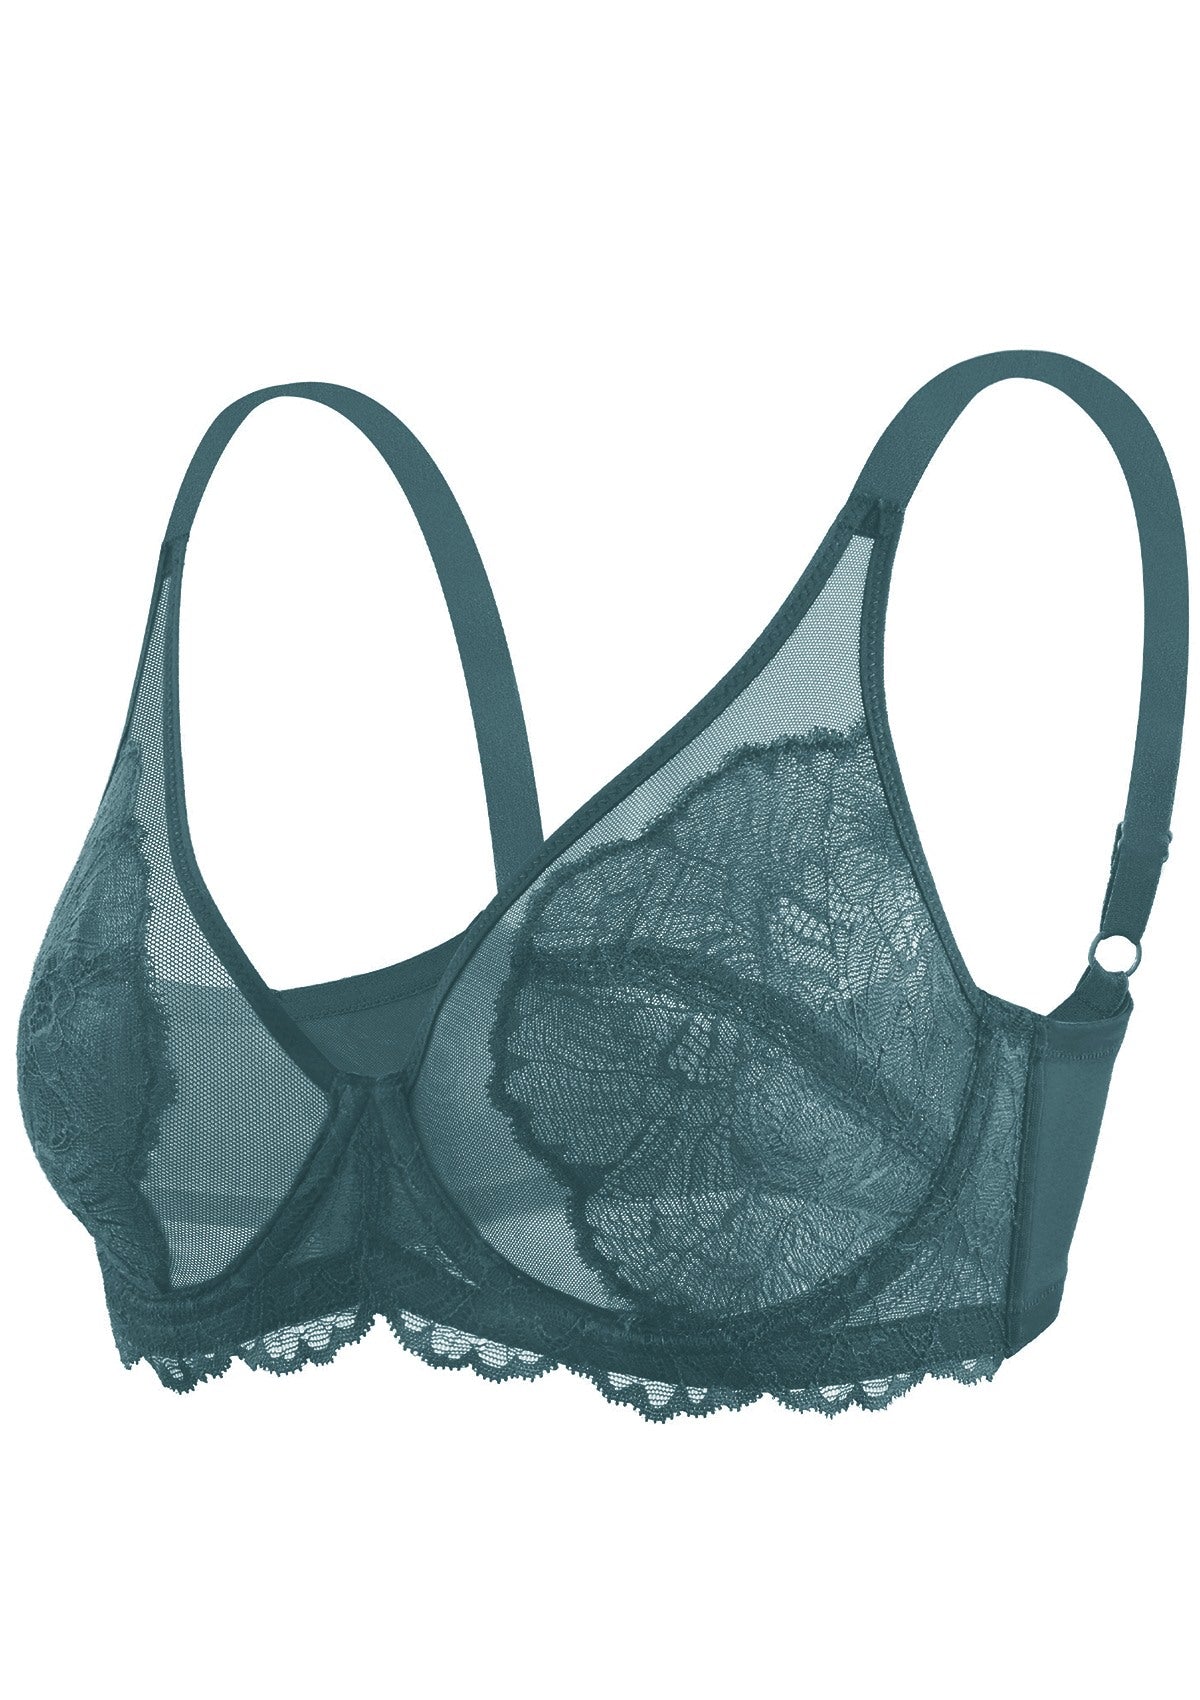 HSIA Blossom Full Figure See-Through Lace Bra For Side And Back Fat - Balsam Blue / 36 / D